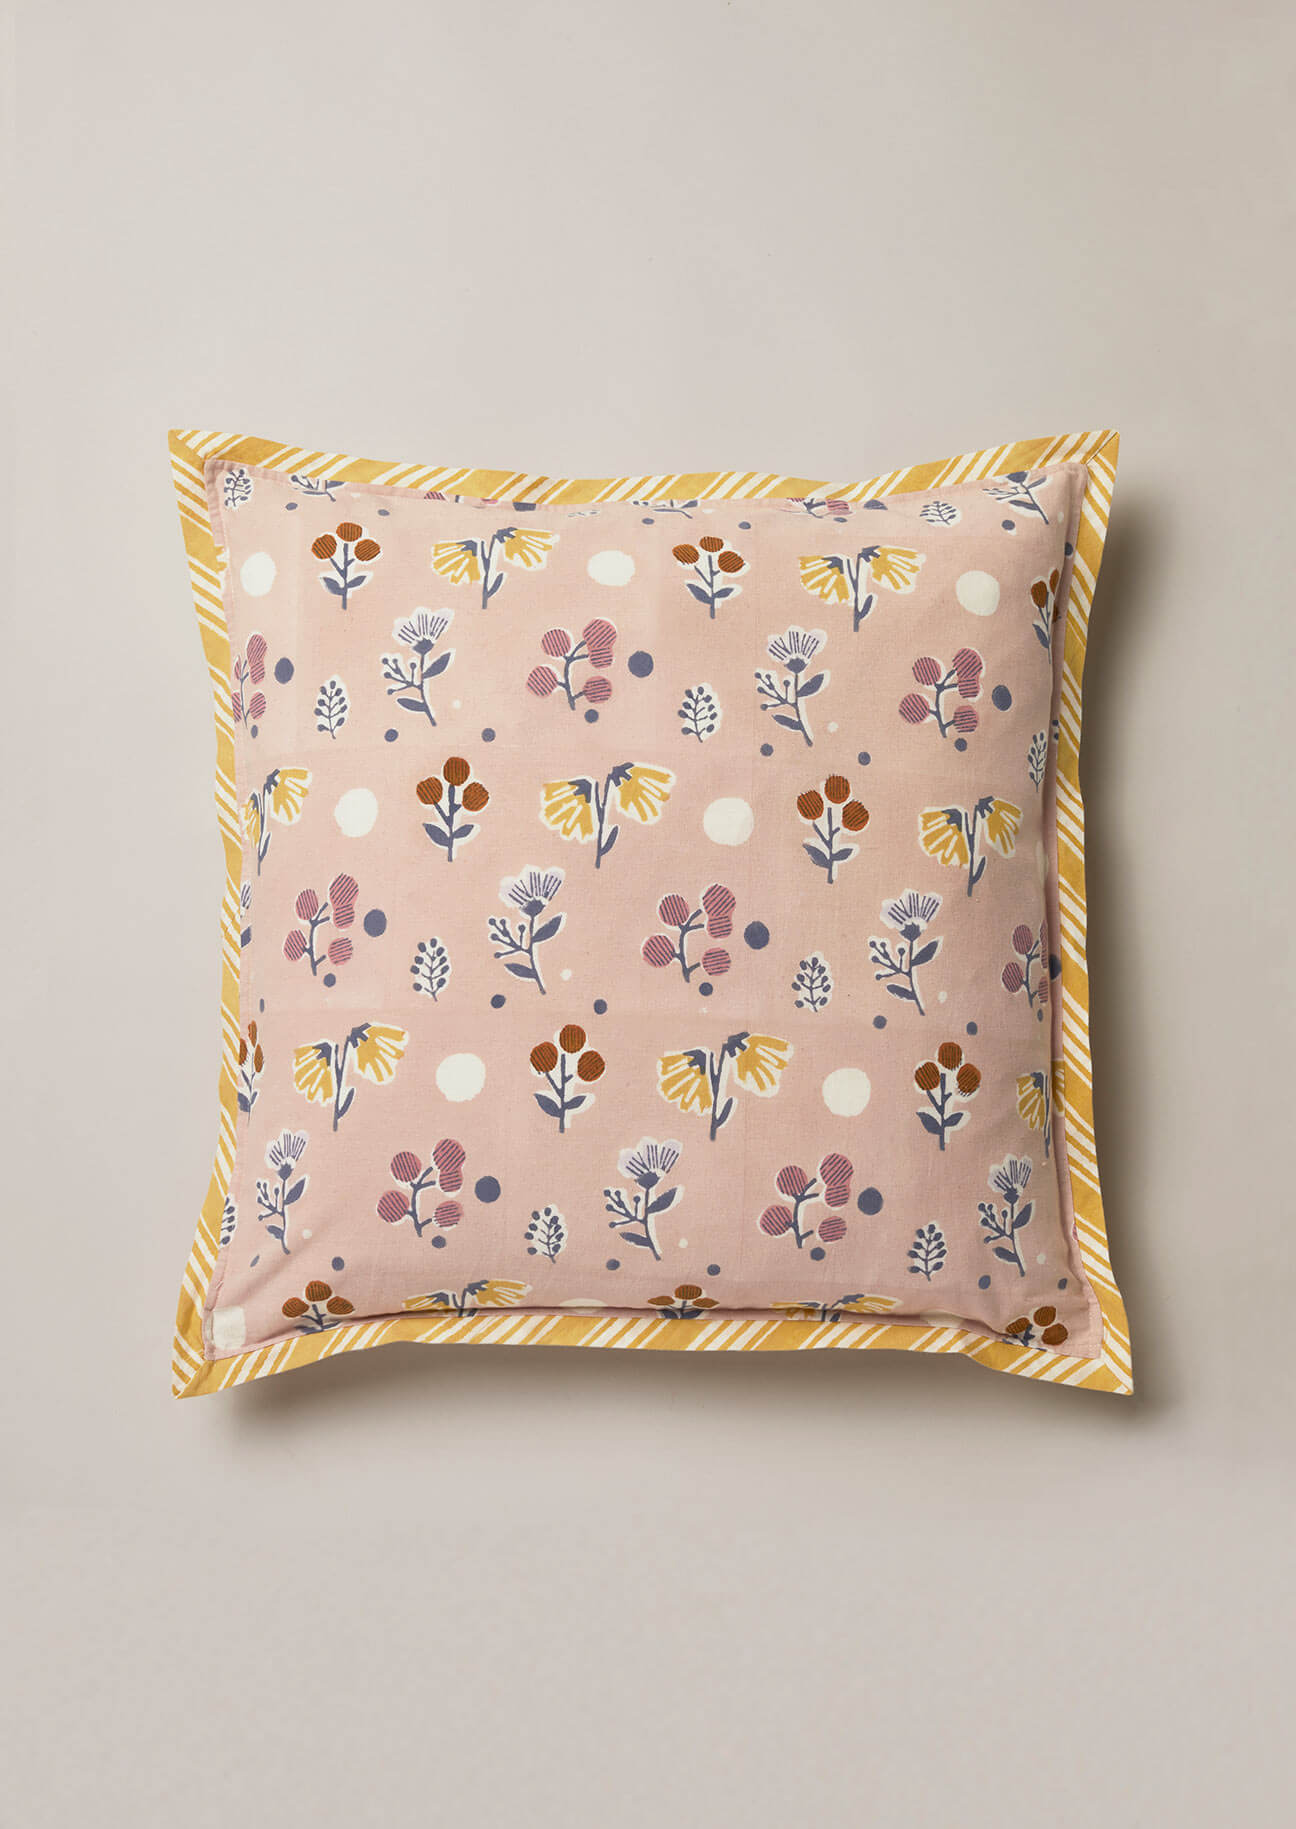 Dusty pink hand block print cushion with blue, yellow and blue flowers and contrast yellow stripe edging.